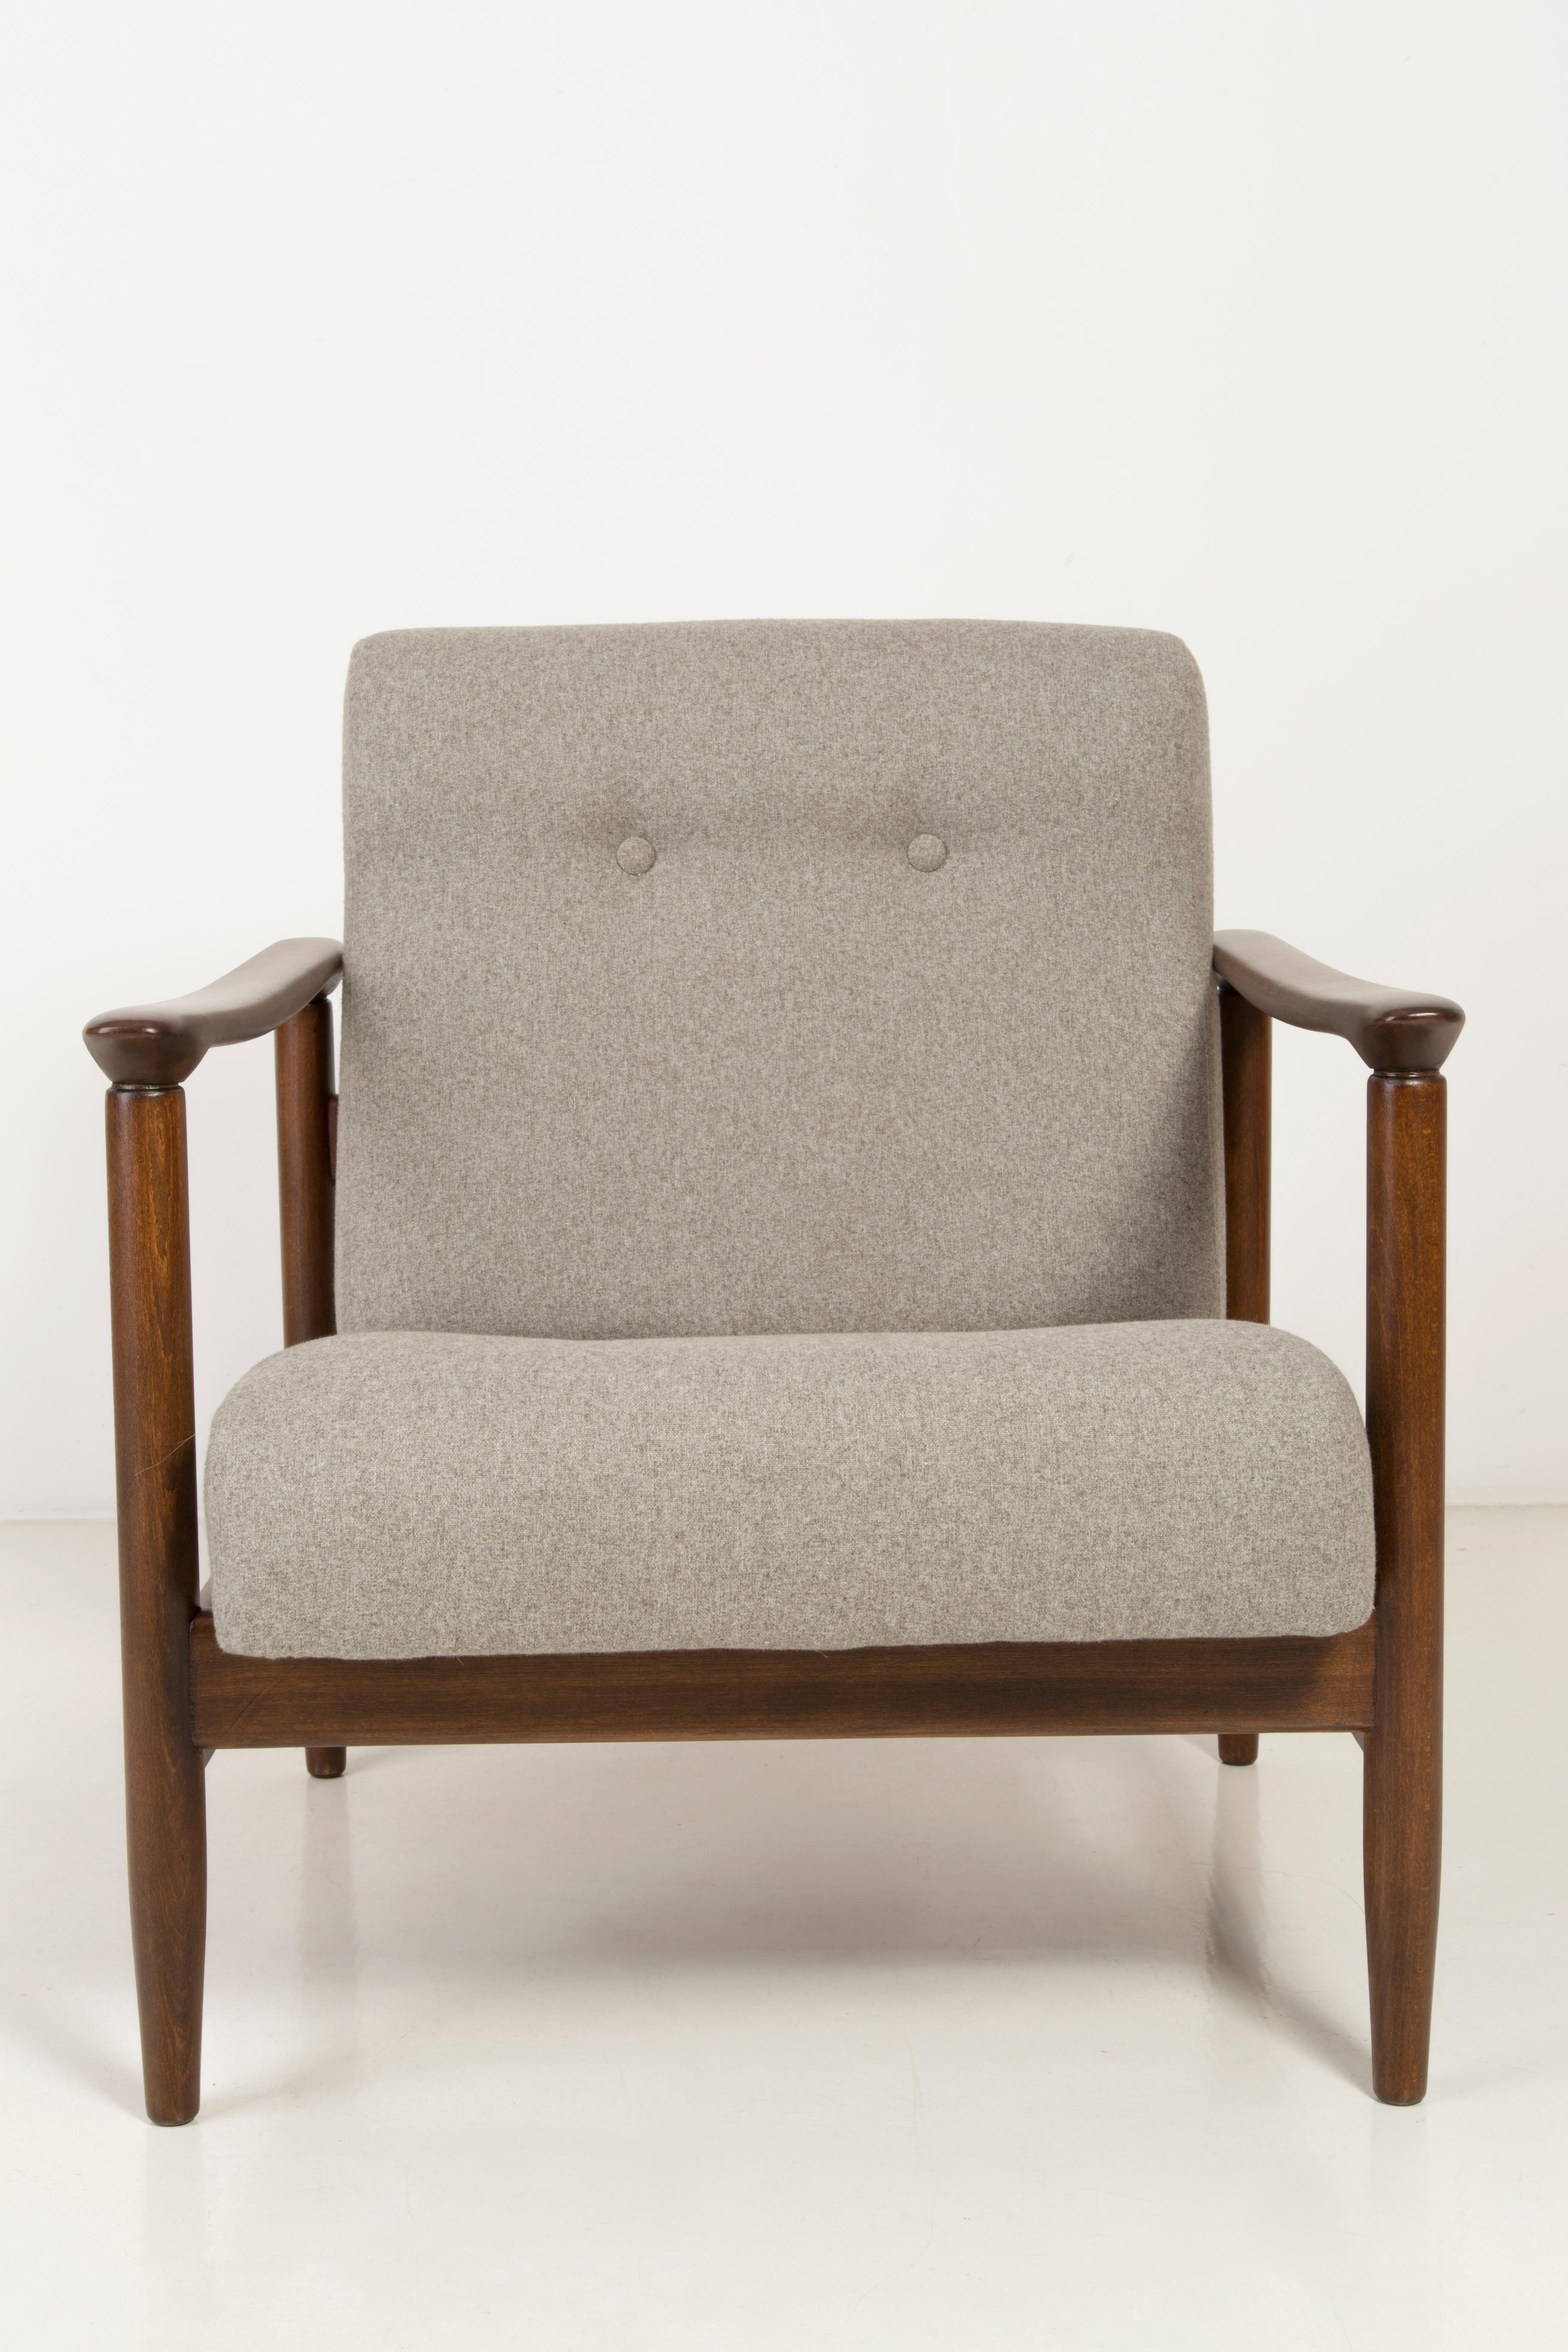 Hand-Crafted 20th Century Beige Armchair, Edmund Homa, Type GFM-142, 1960s, Poland For Sale